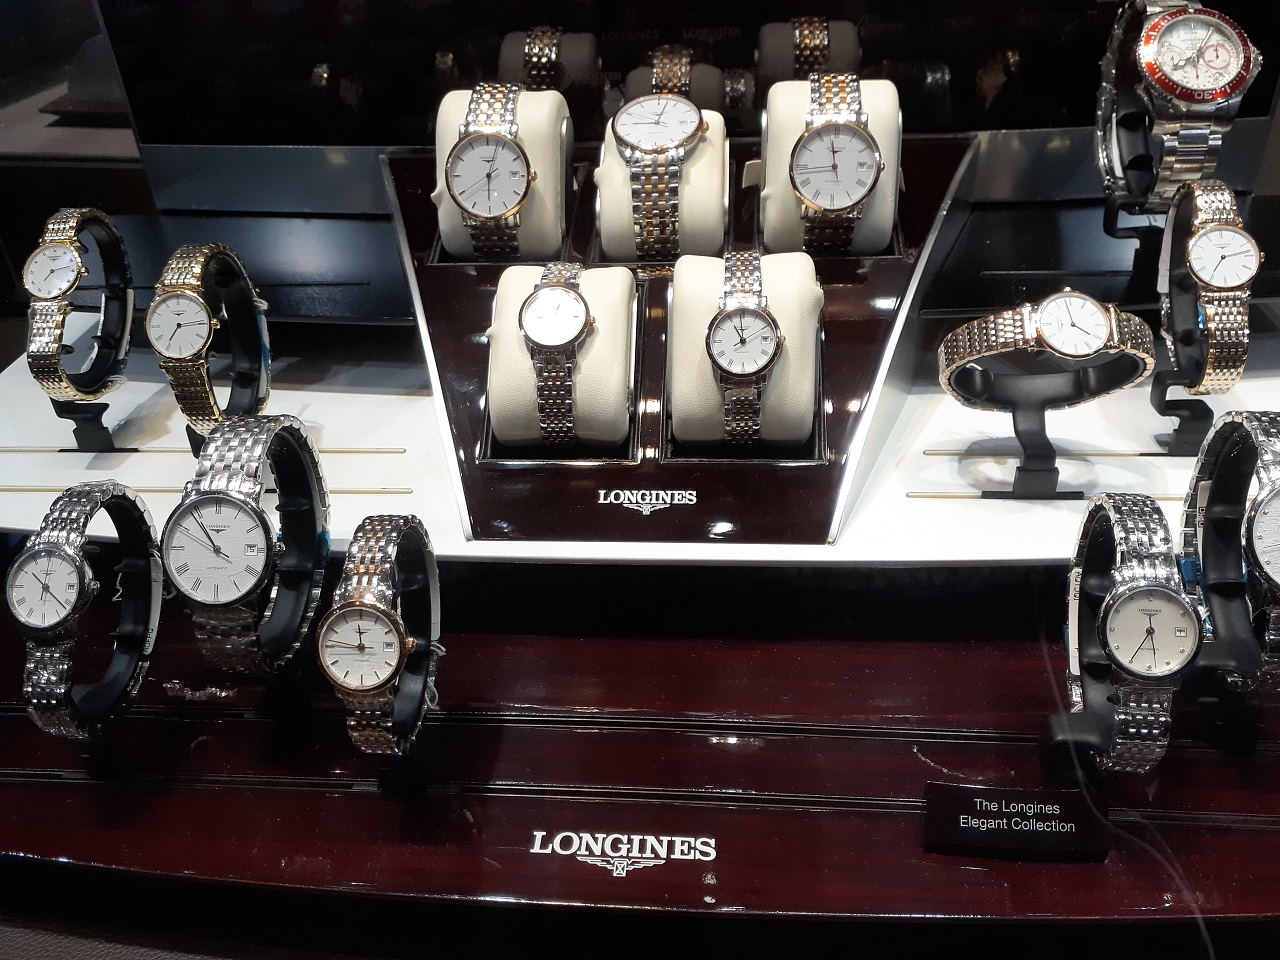 Looking for Affordable Luxury Watches for Sale?